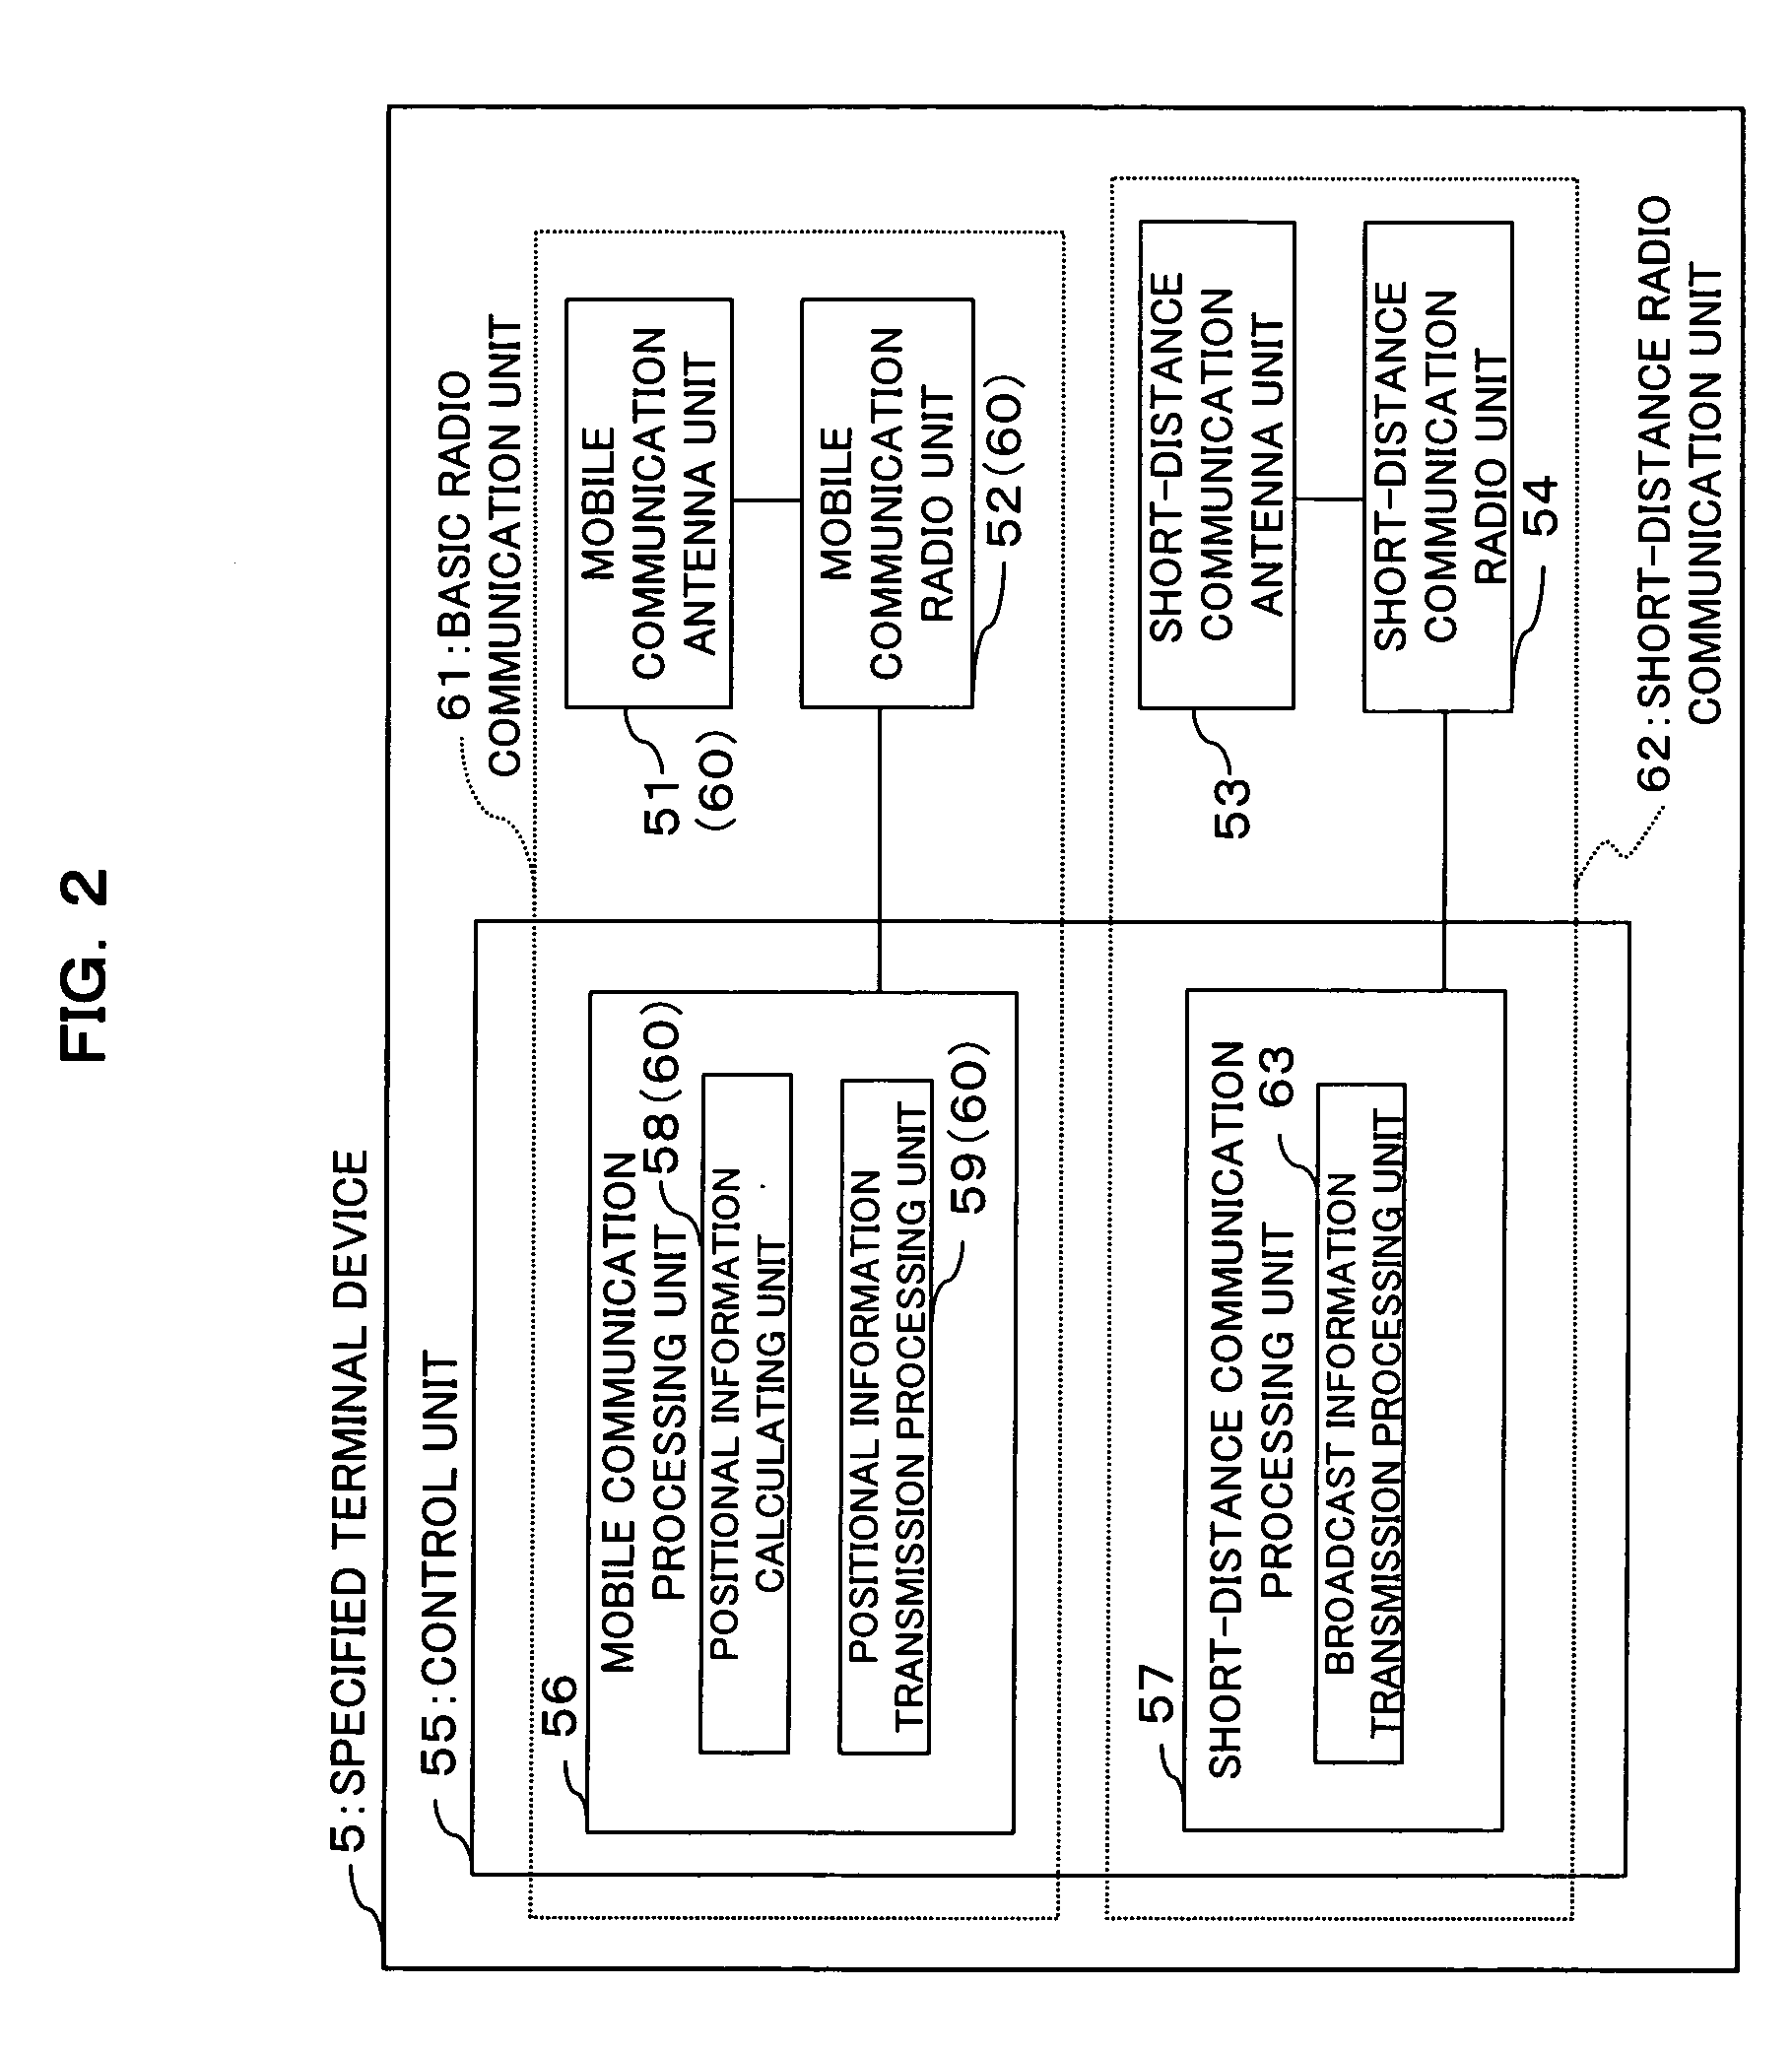 Positional information providing method and positional information providing system